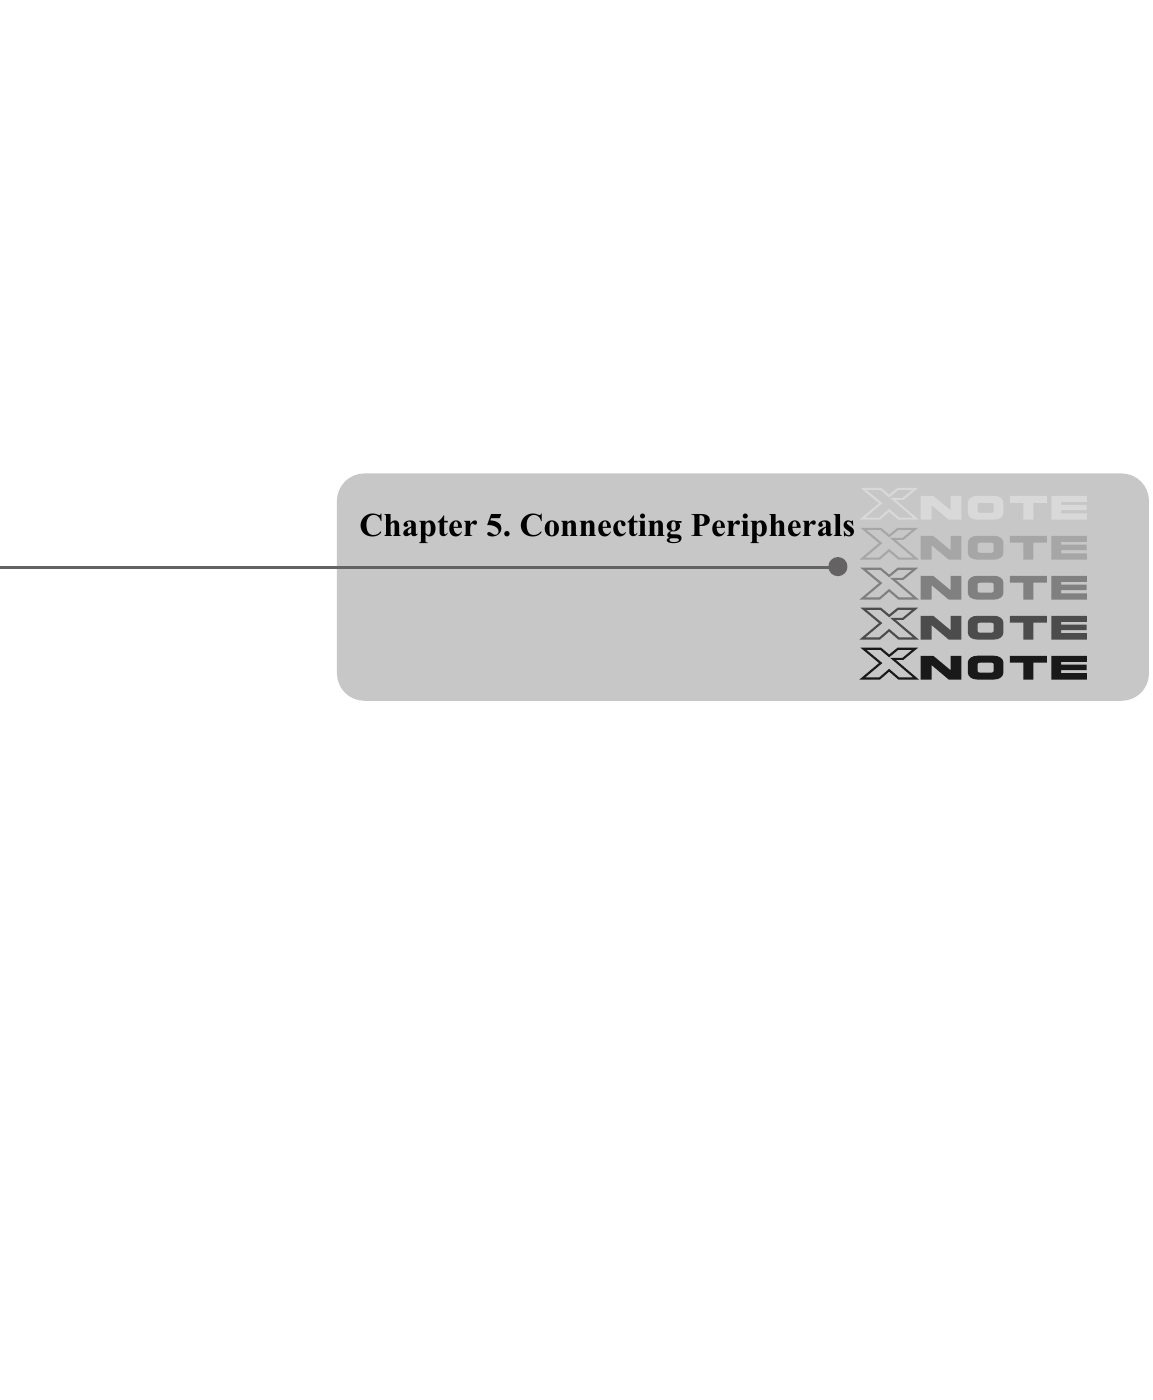 Chapter 5. Connecting Peripherals